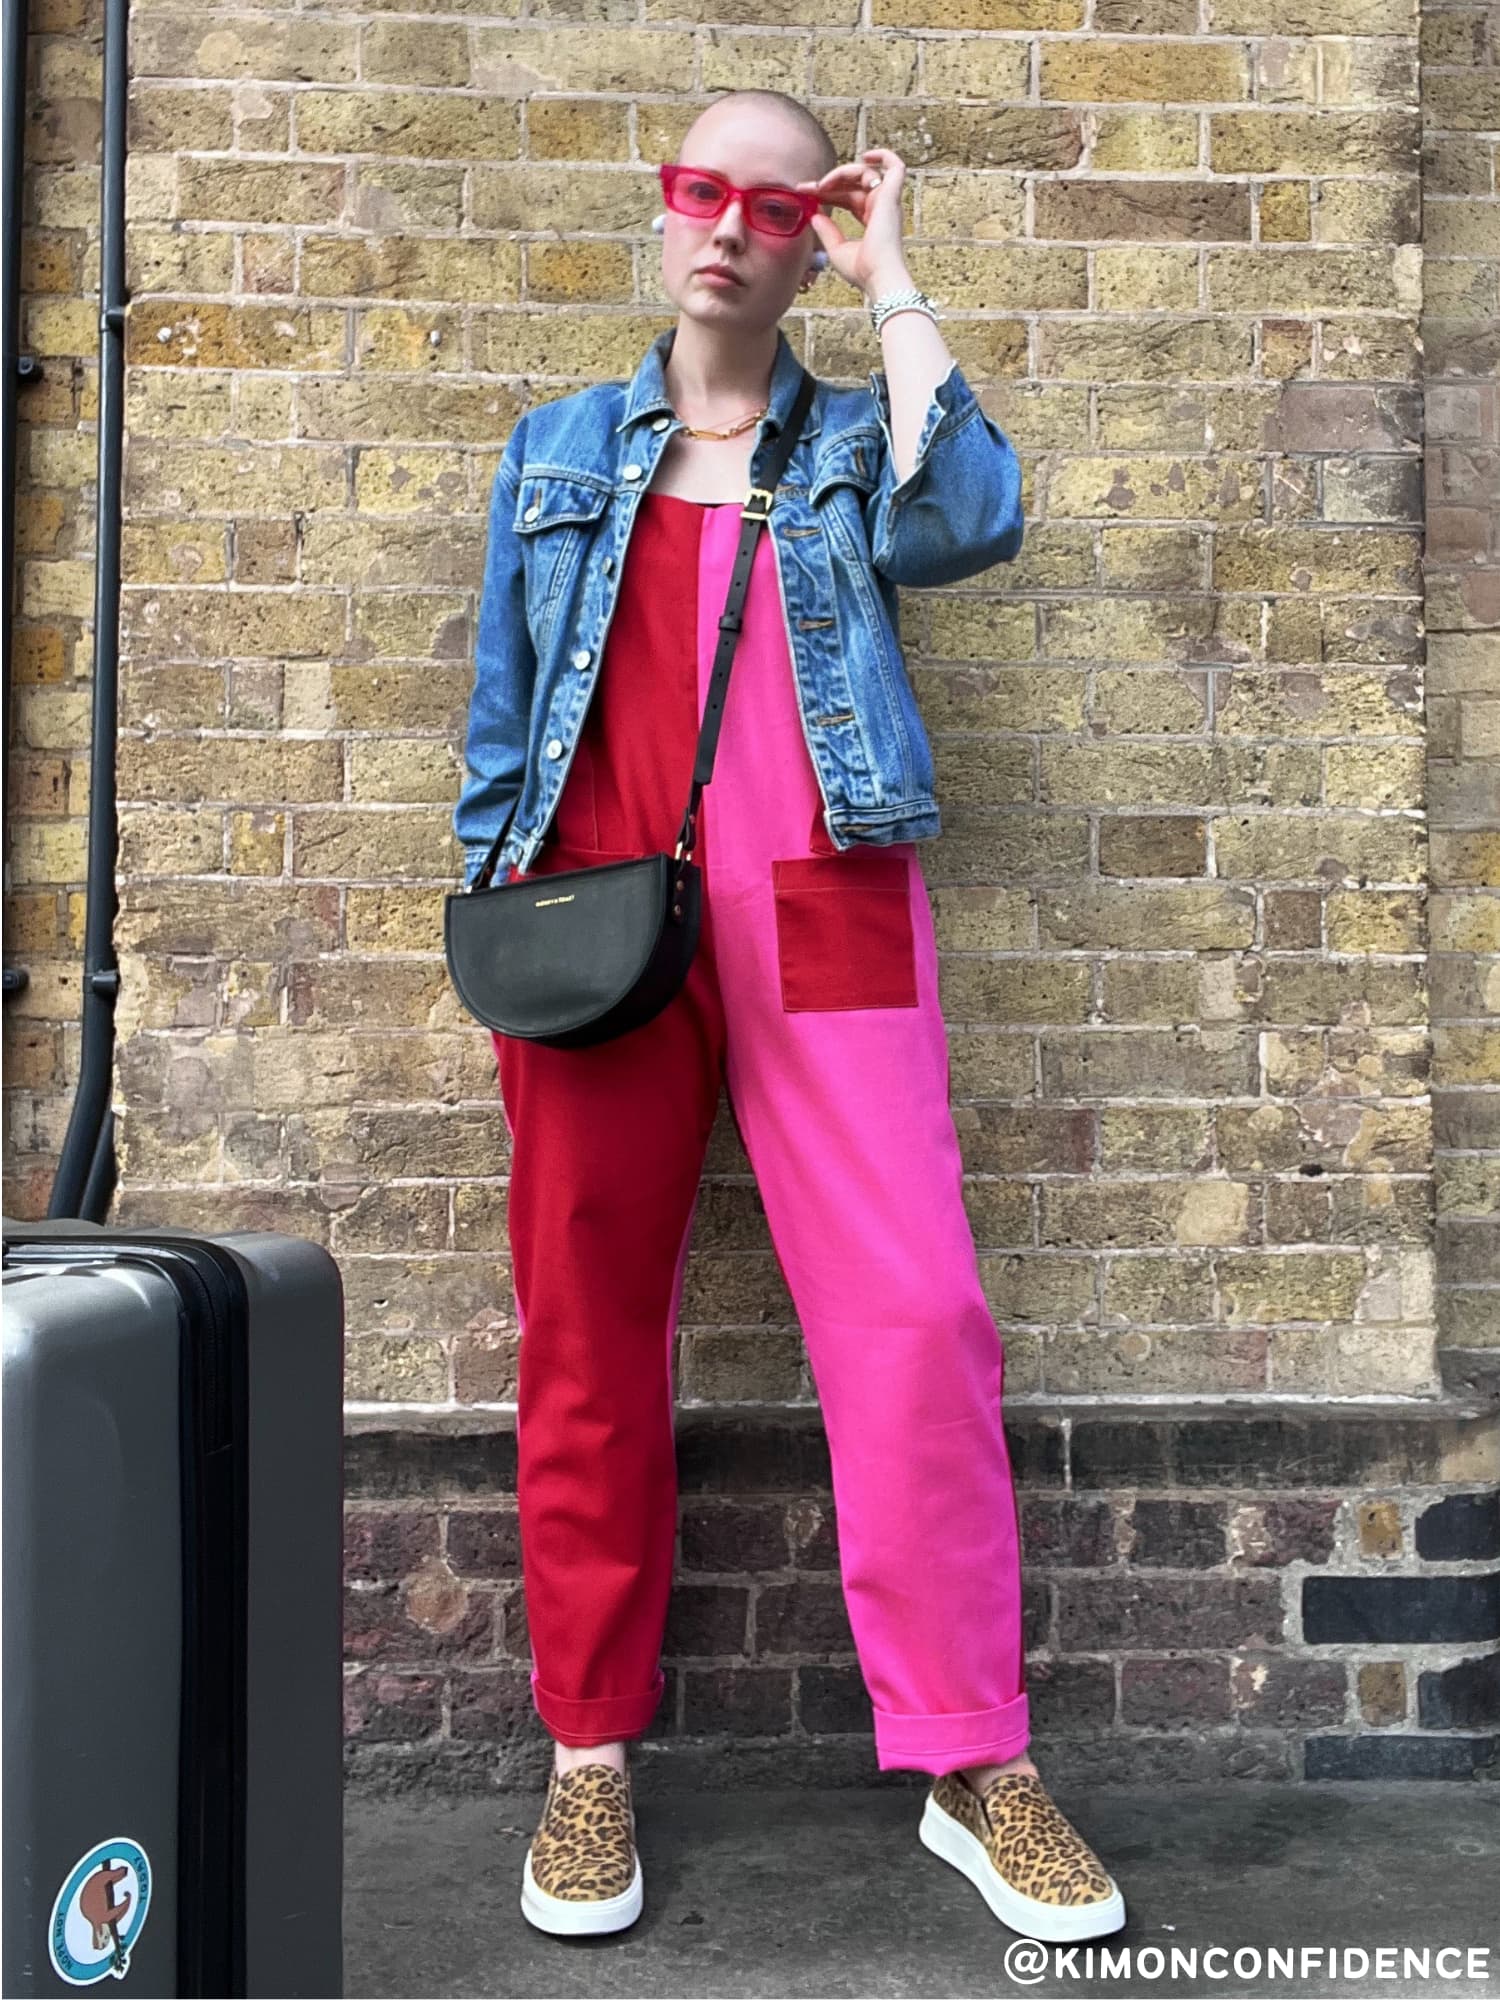 Kim on Confidence wears the Red and Pink Reclaimed Cotton Dungarees by Wild Clouds